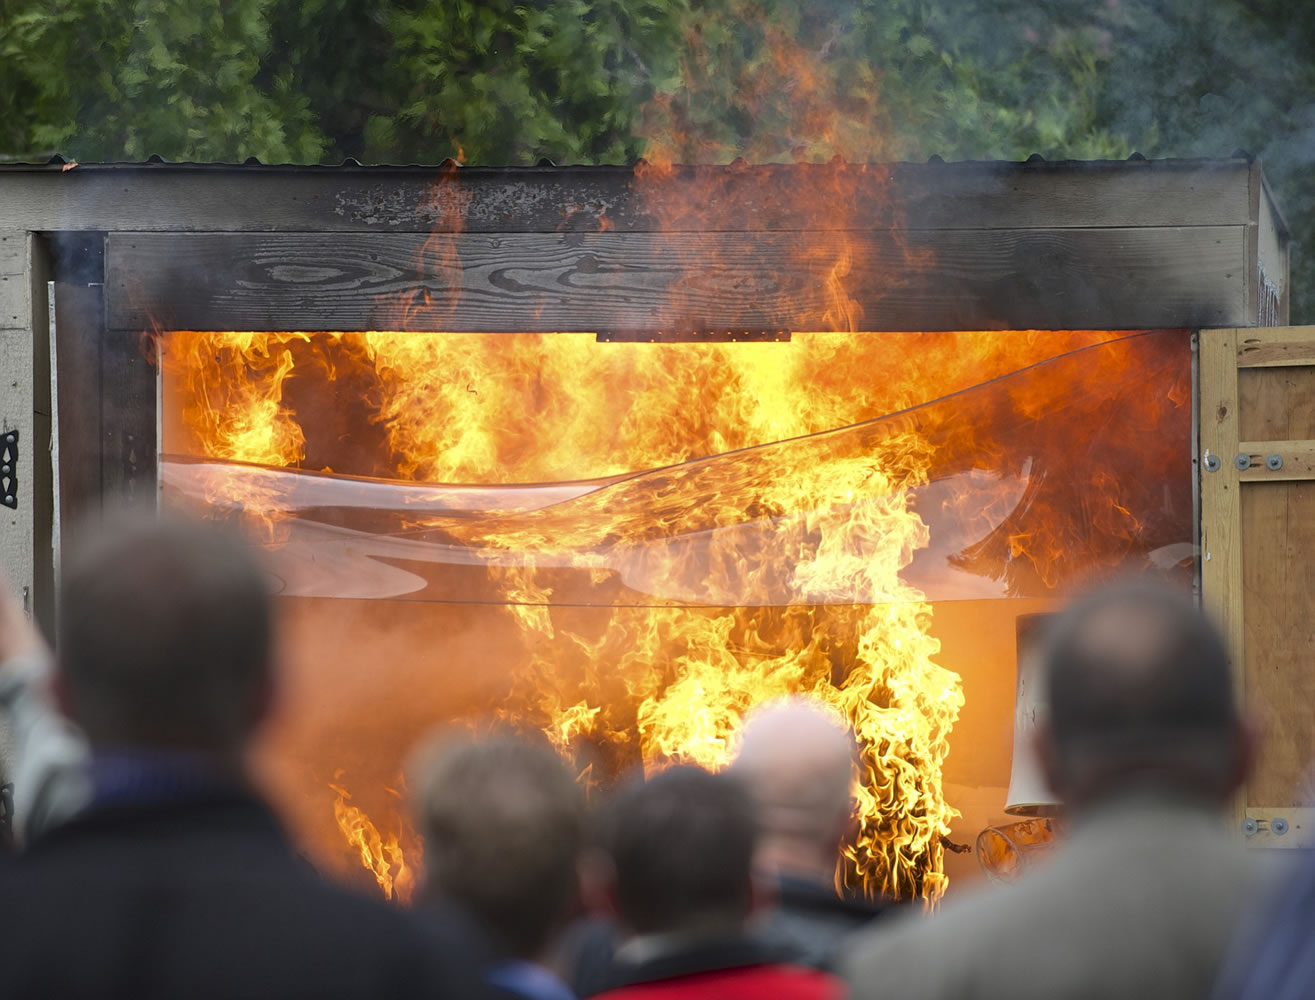 Spectators watch a live-burn demonstration Thursday that was organized by fire officials to show how fire sprinklers work.